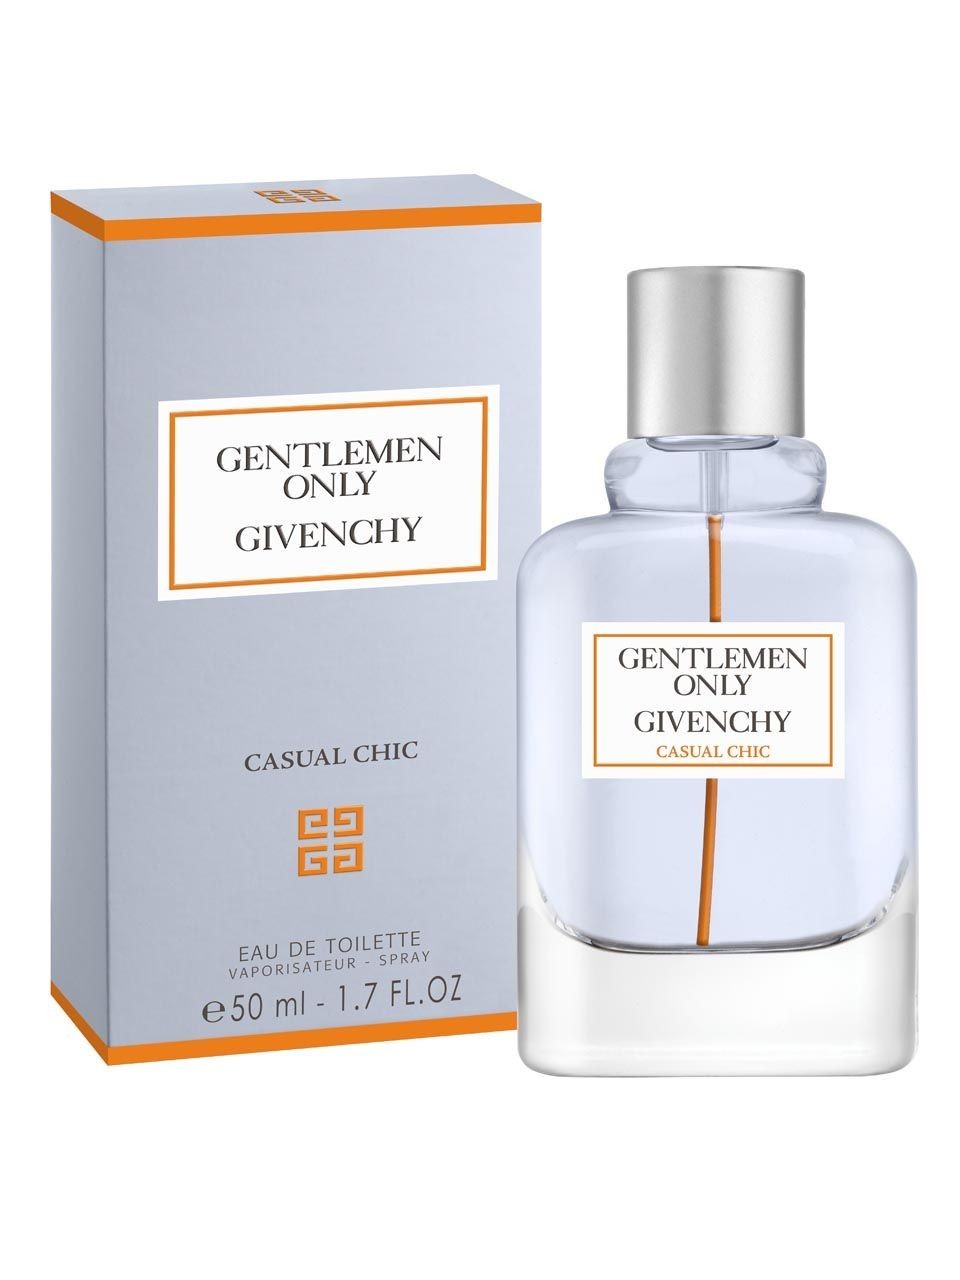 Изображение парфюма Givenchy Gentlemen Only Casual Chic